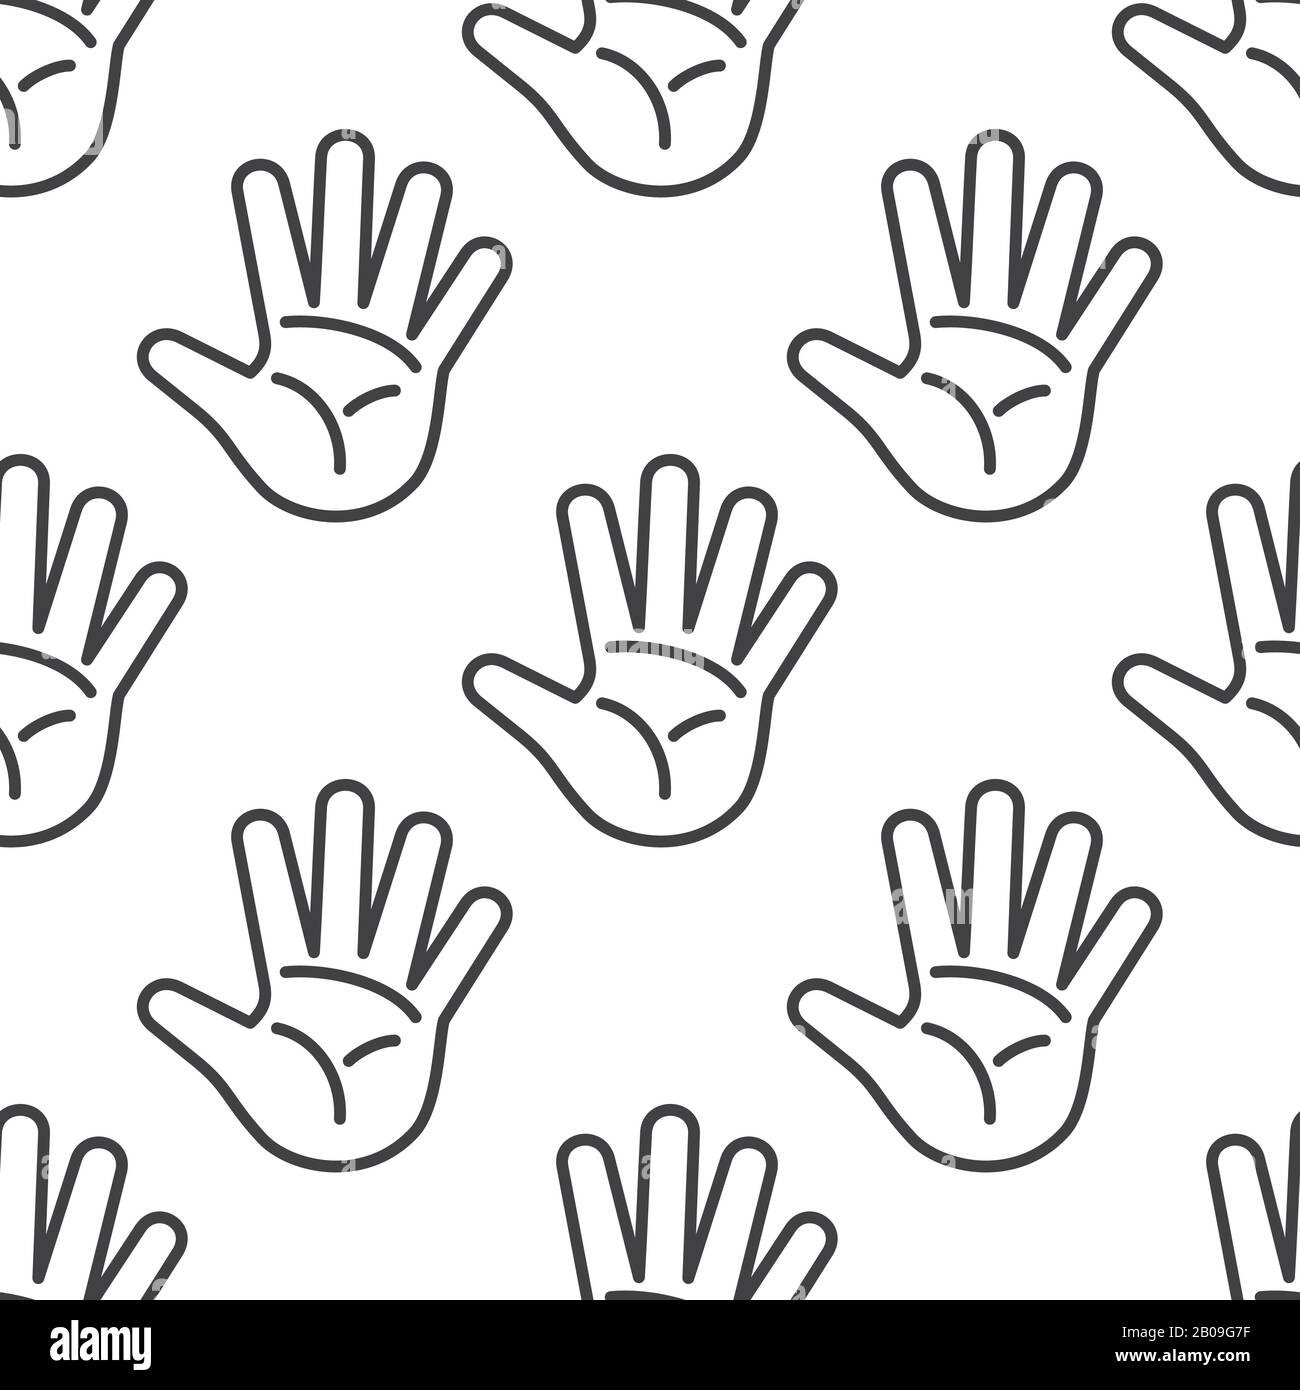 Open palm vector seamless pattern in black and white. Open hands outline illustration Stock Vector